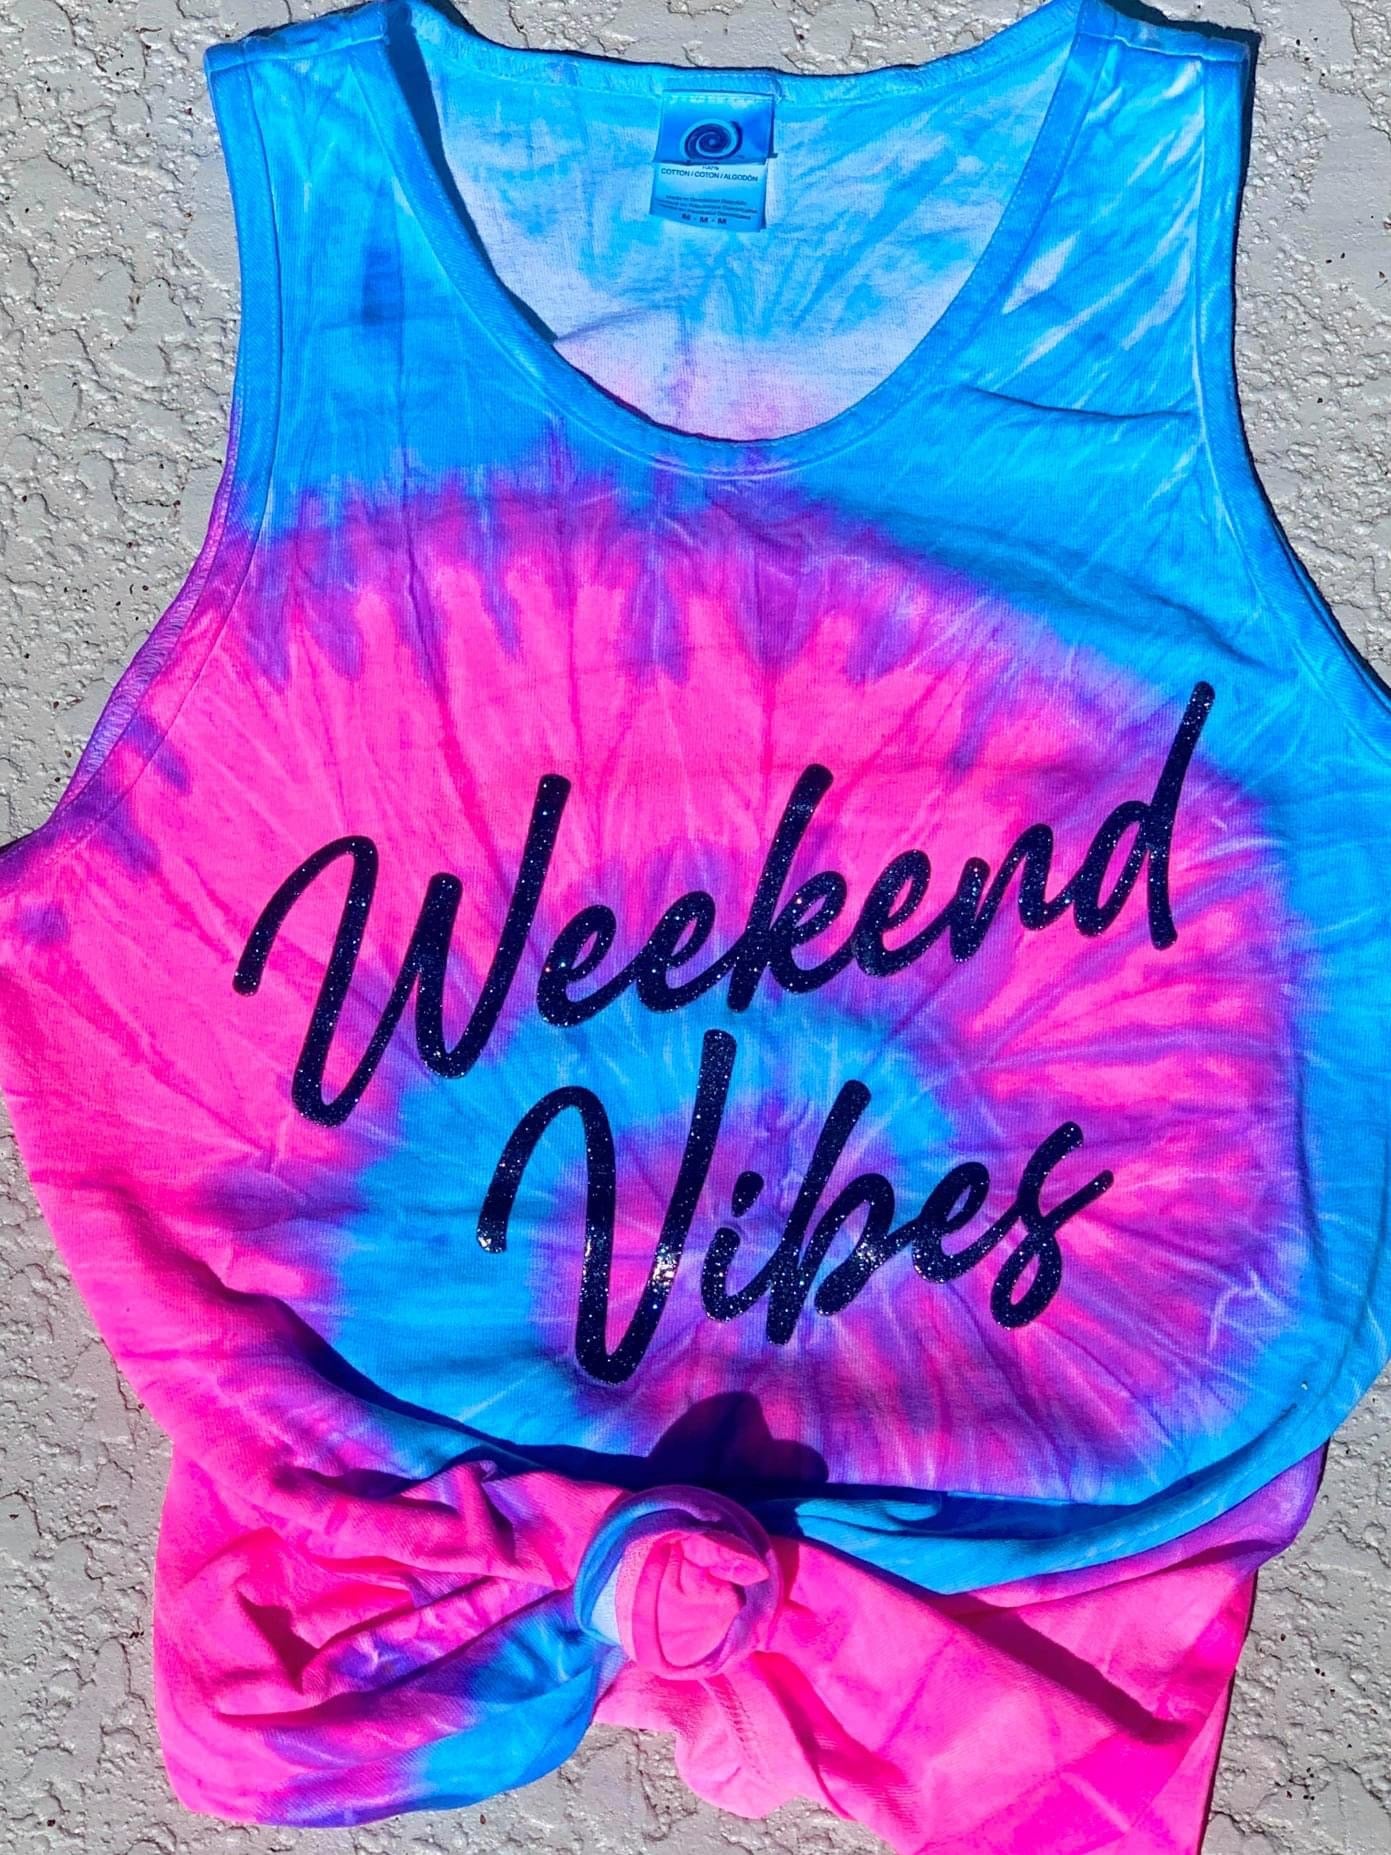 SMALL ONLY GRAPHIC TANK - Weekend Vibes